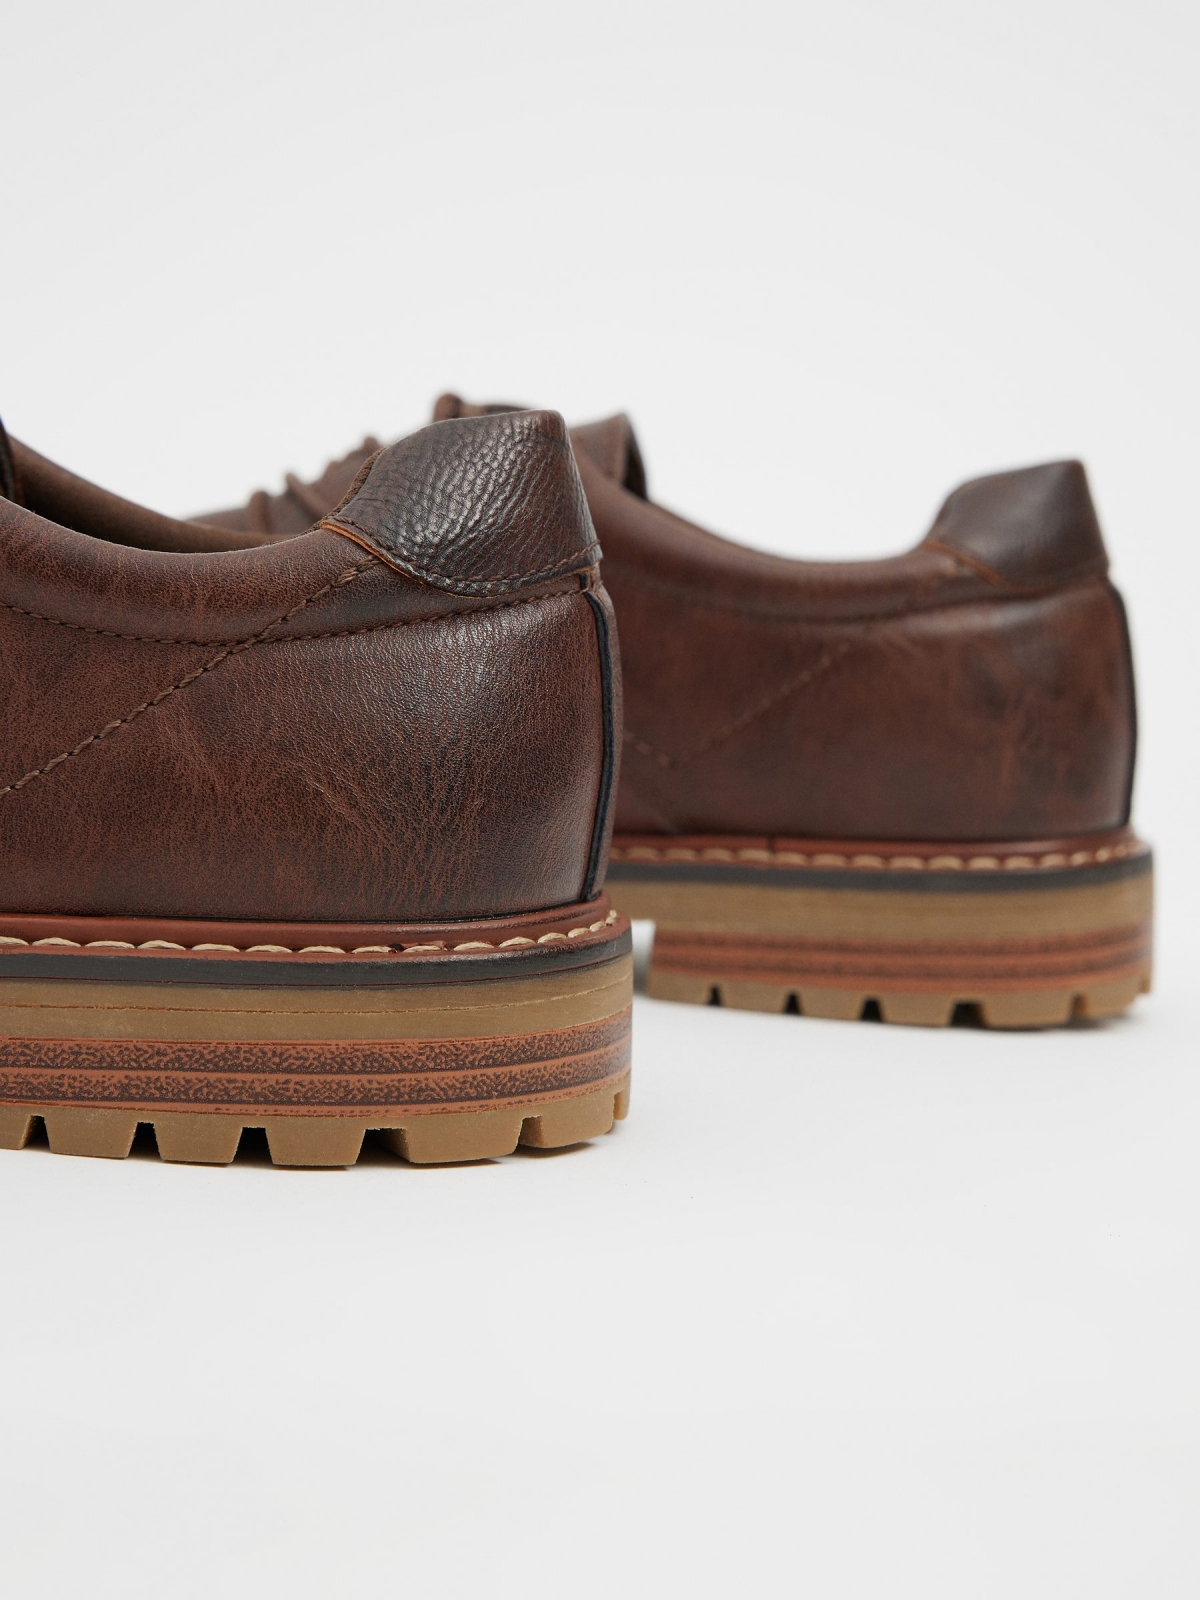 Brown leather effect blucher shoe brown detail view